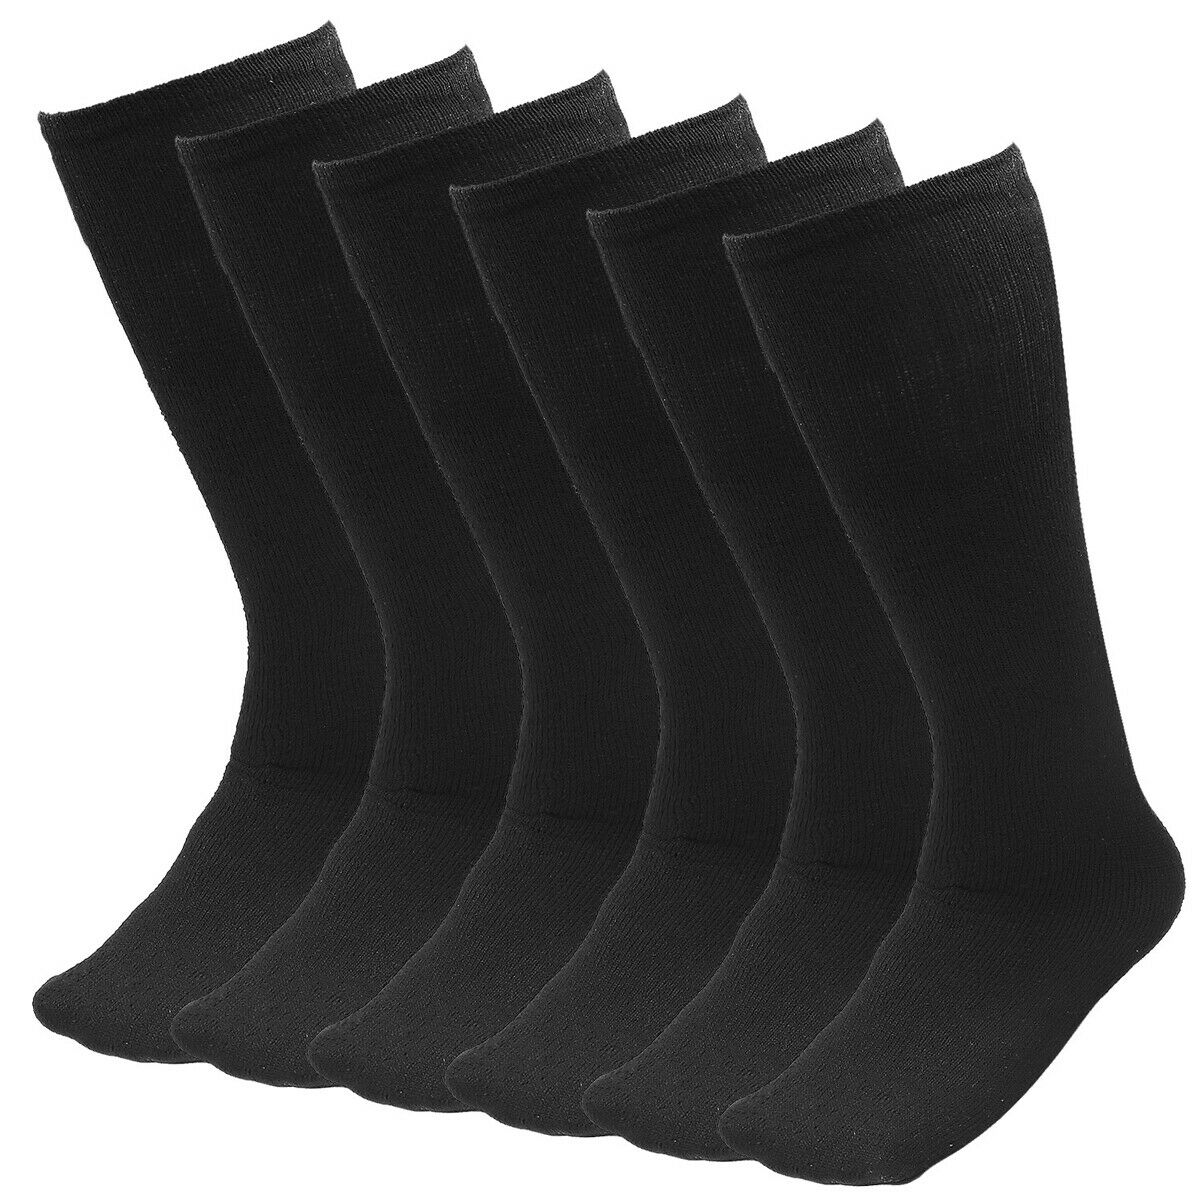 6 Pairs Pack Men's Athletic Tube Socks Running Sports "OVER THE CALF" Full Cushioned Premium Soft Cotton